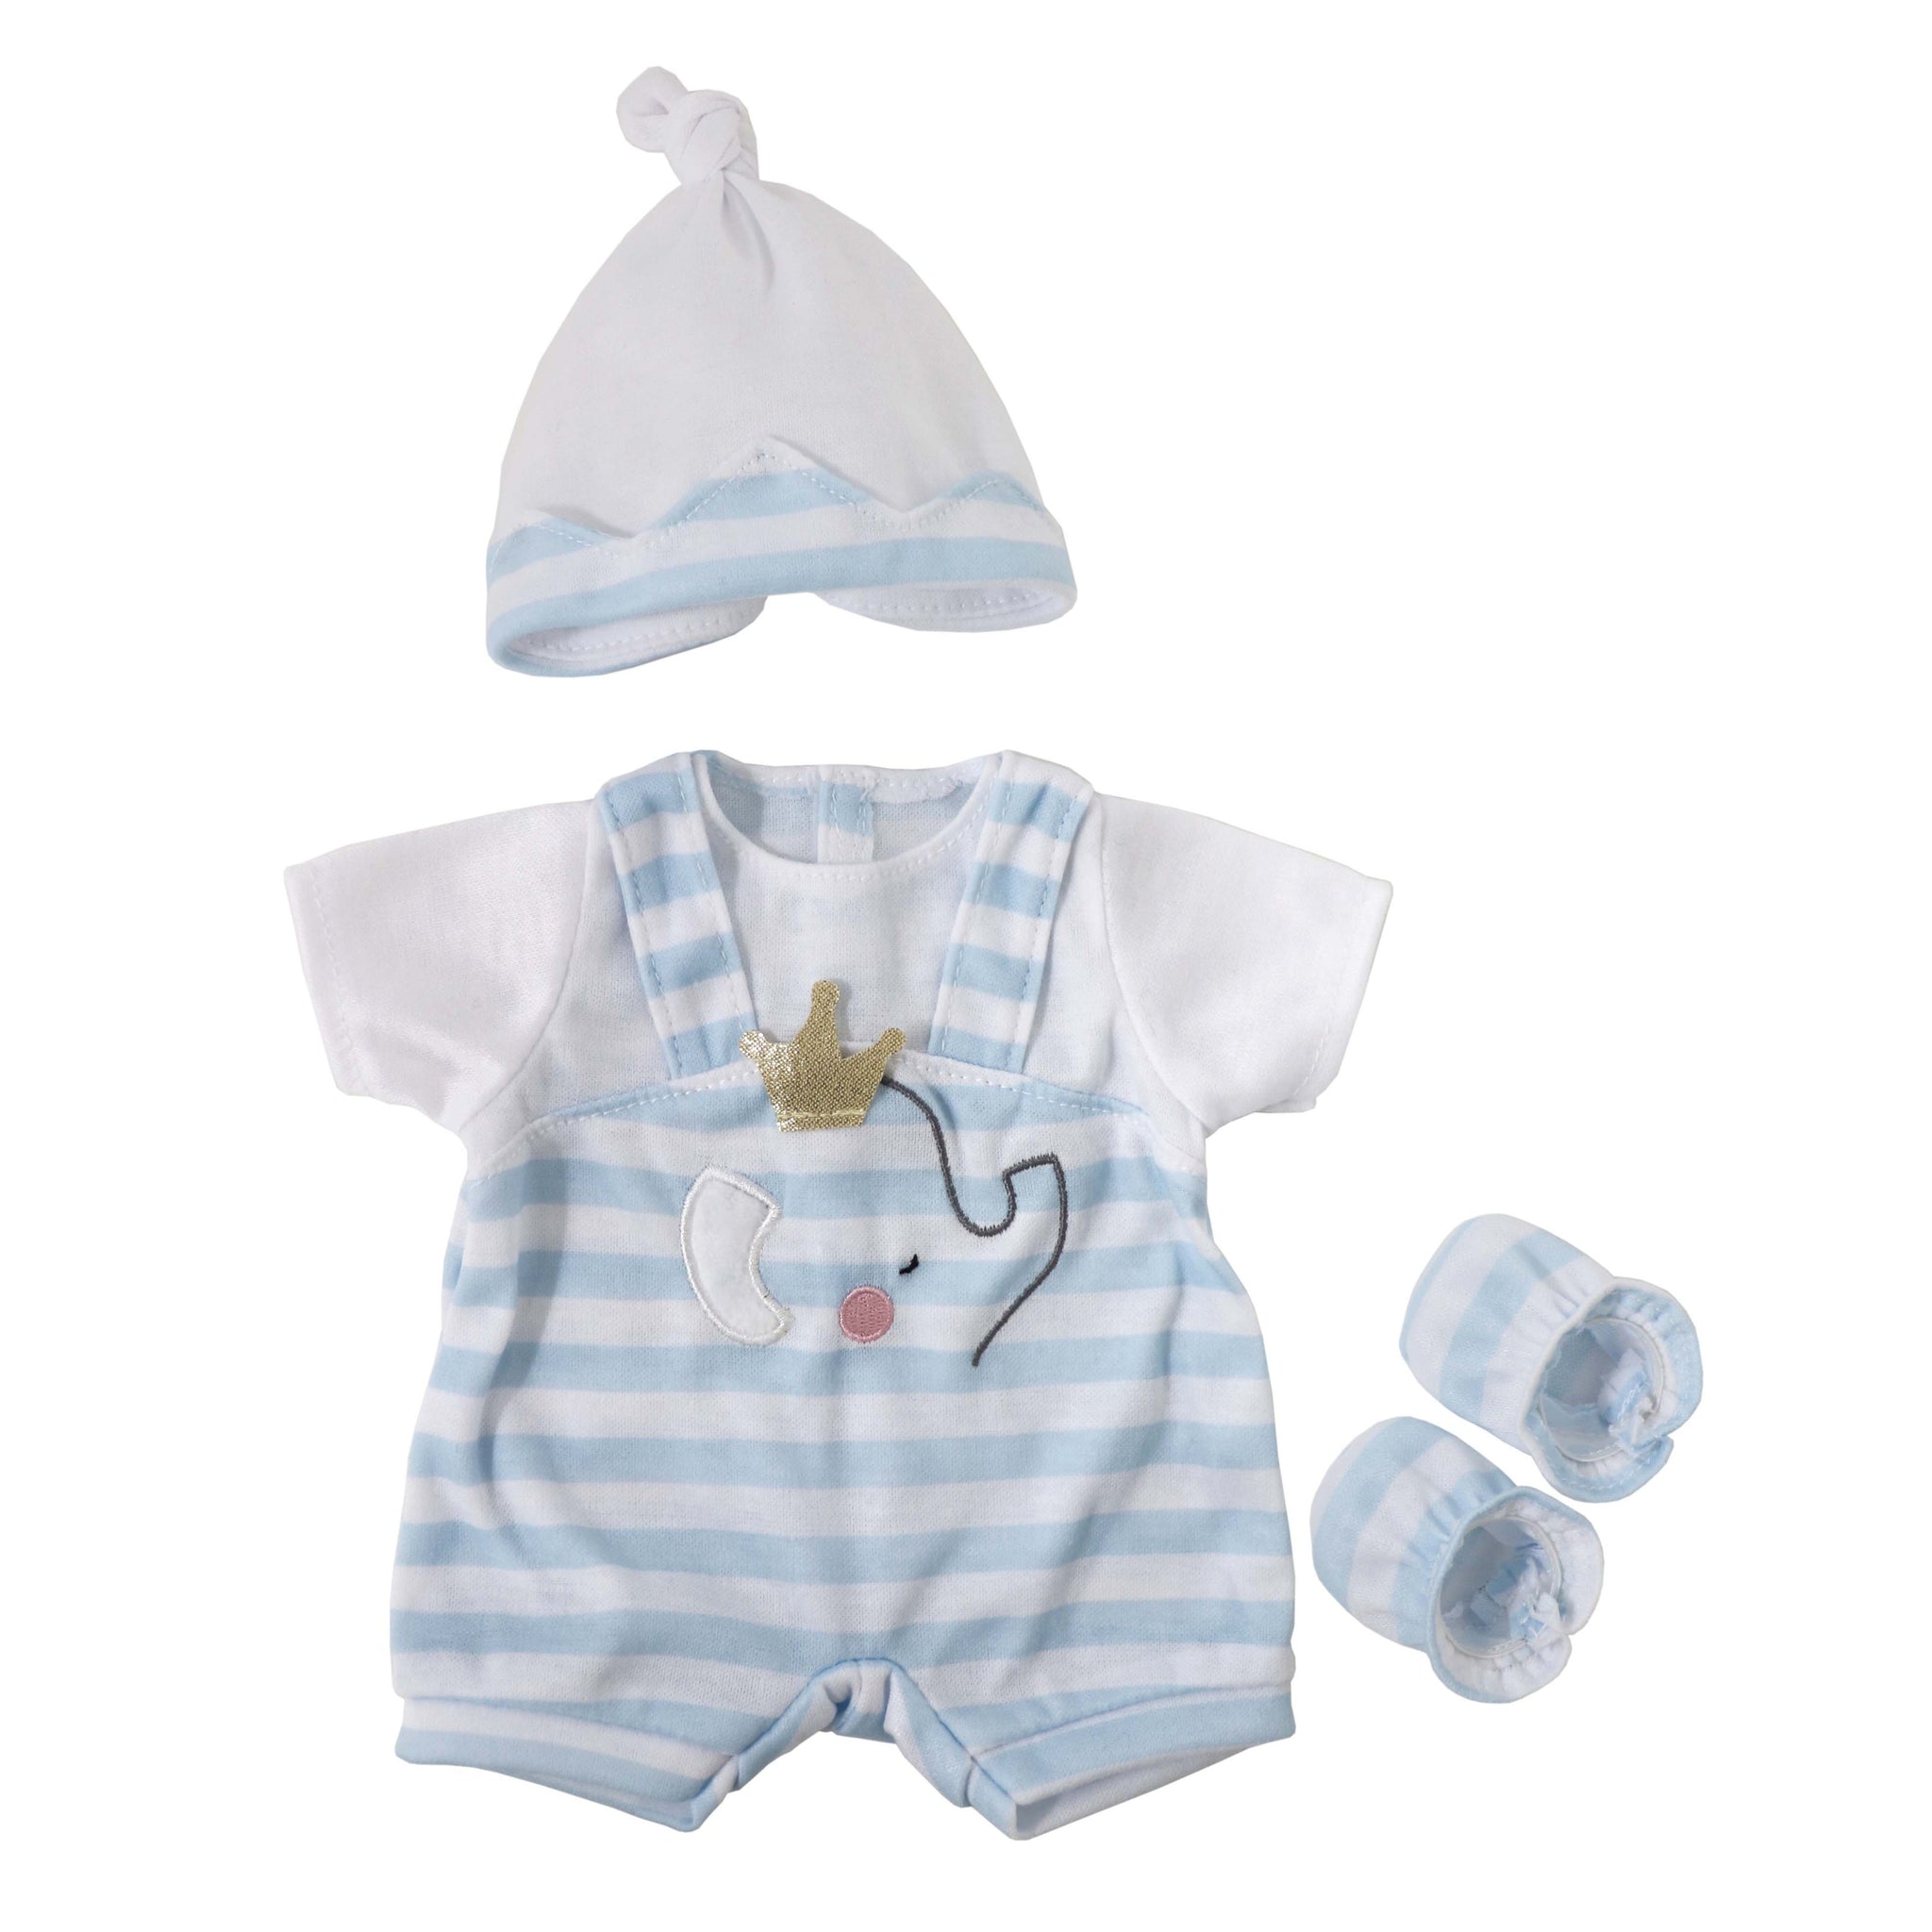 JC Toys Berenguer Boutique Baby Doll Outfit  Blue Stripes and White Overall Shorts Includes Headband and Booties